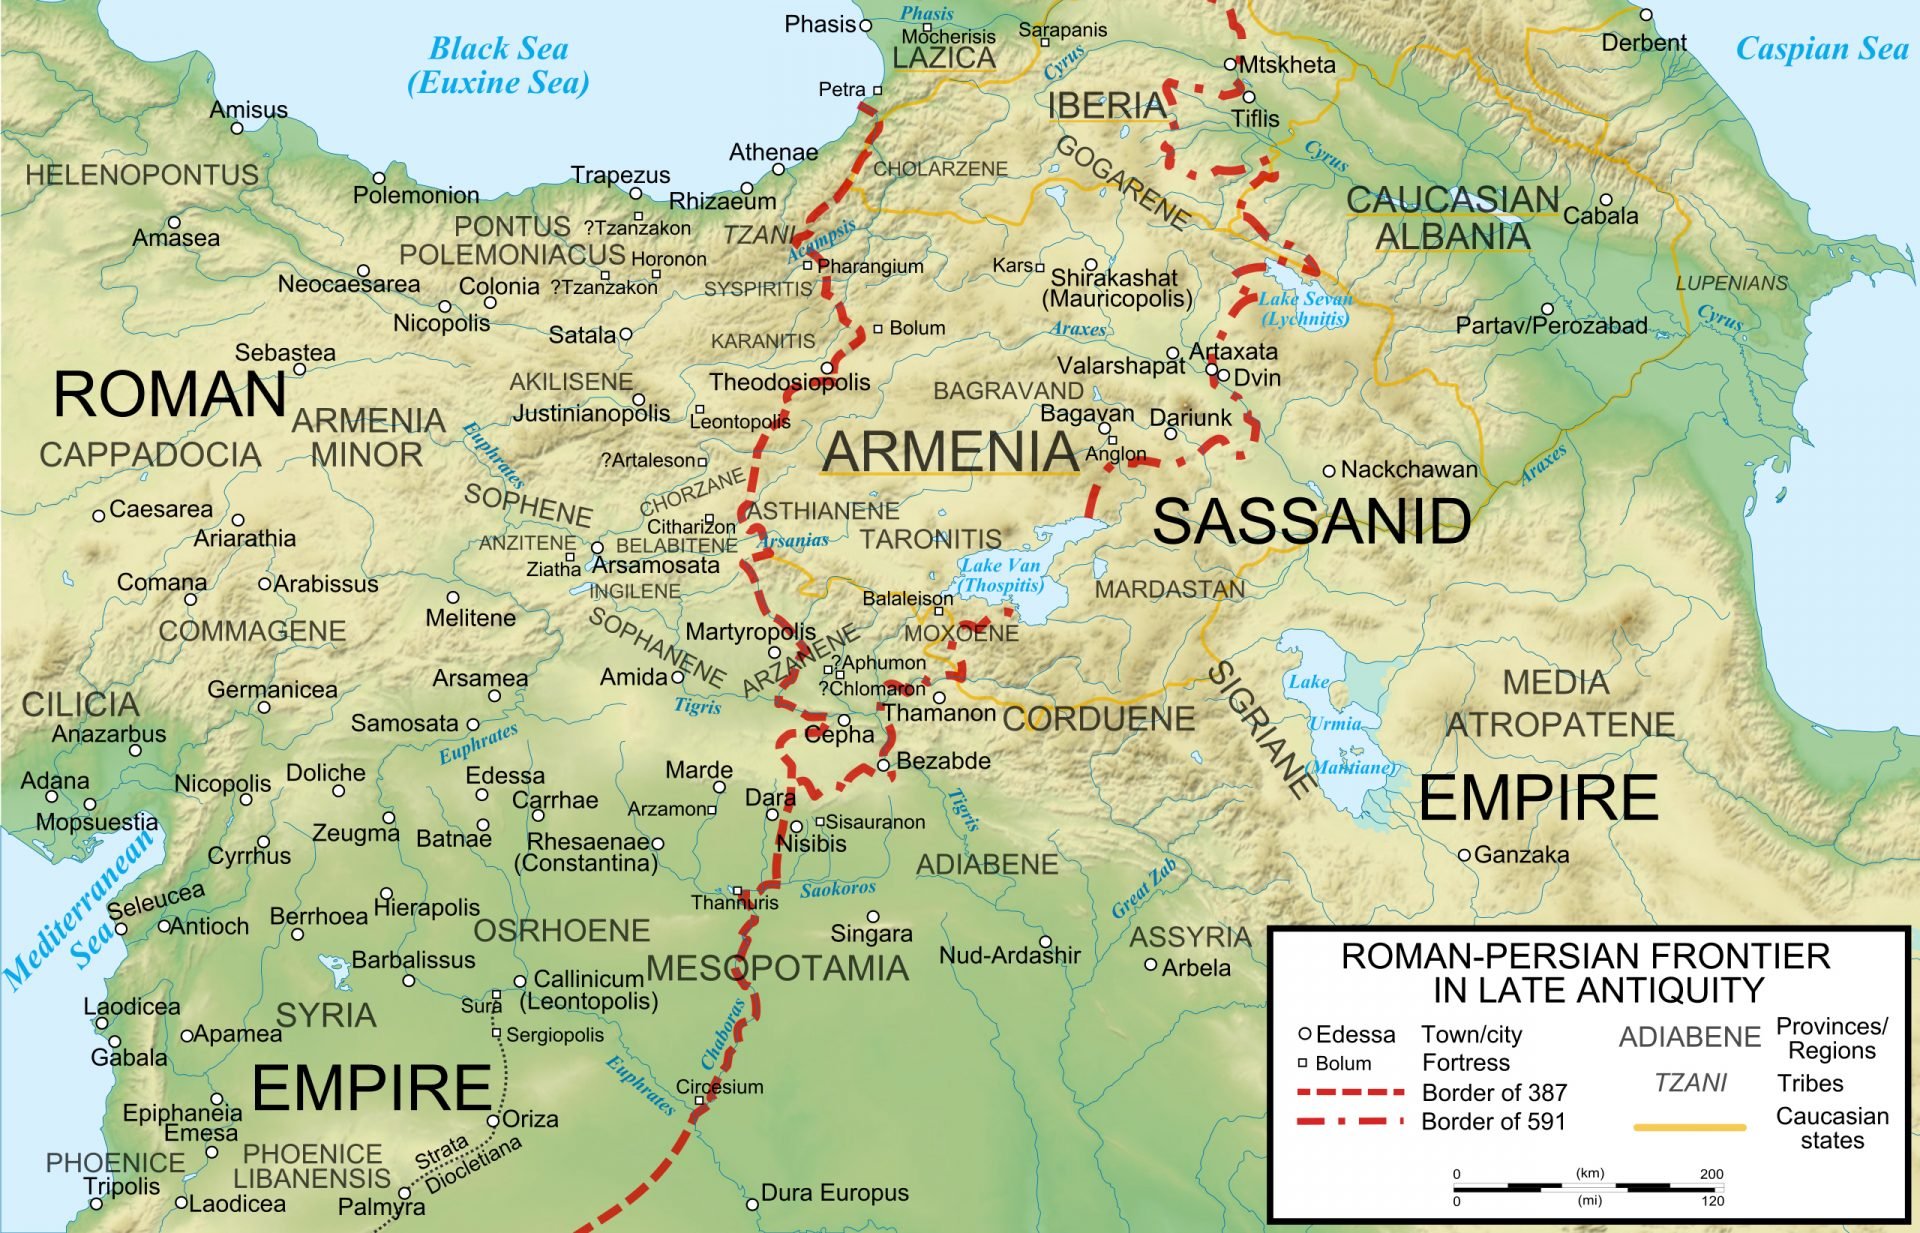 A map of the Roman-Persian Frontier in Late Antiquity, showing the borders of the Roman and Sassanid Empires as of 387 AD and as of 591 AD.